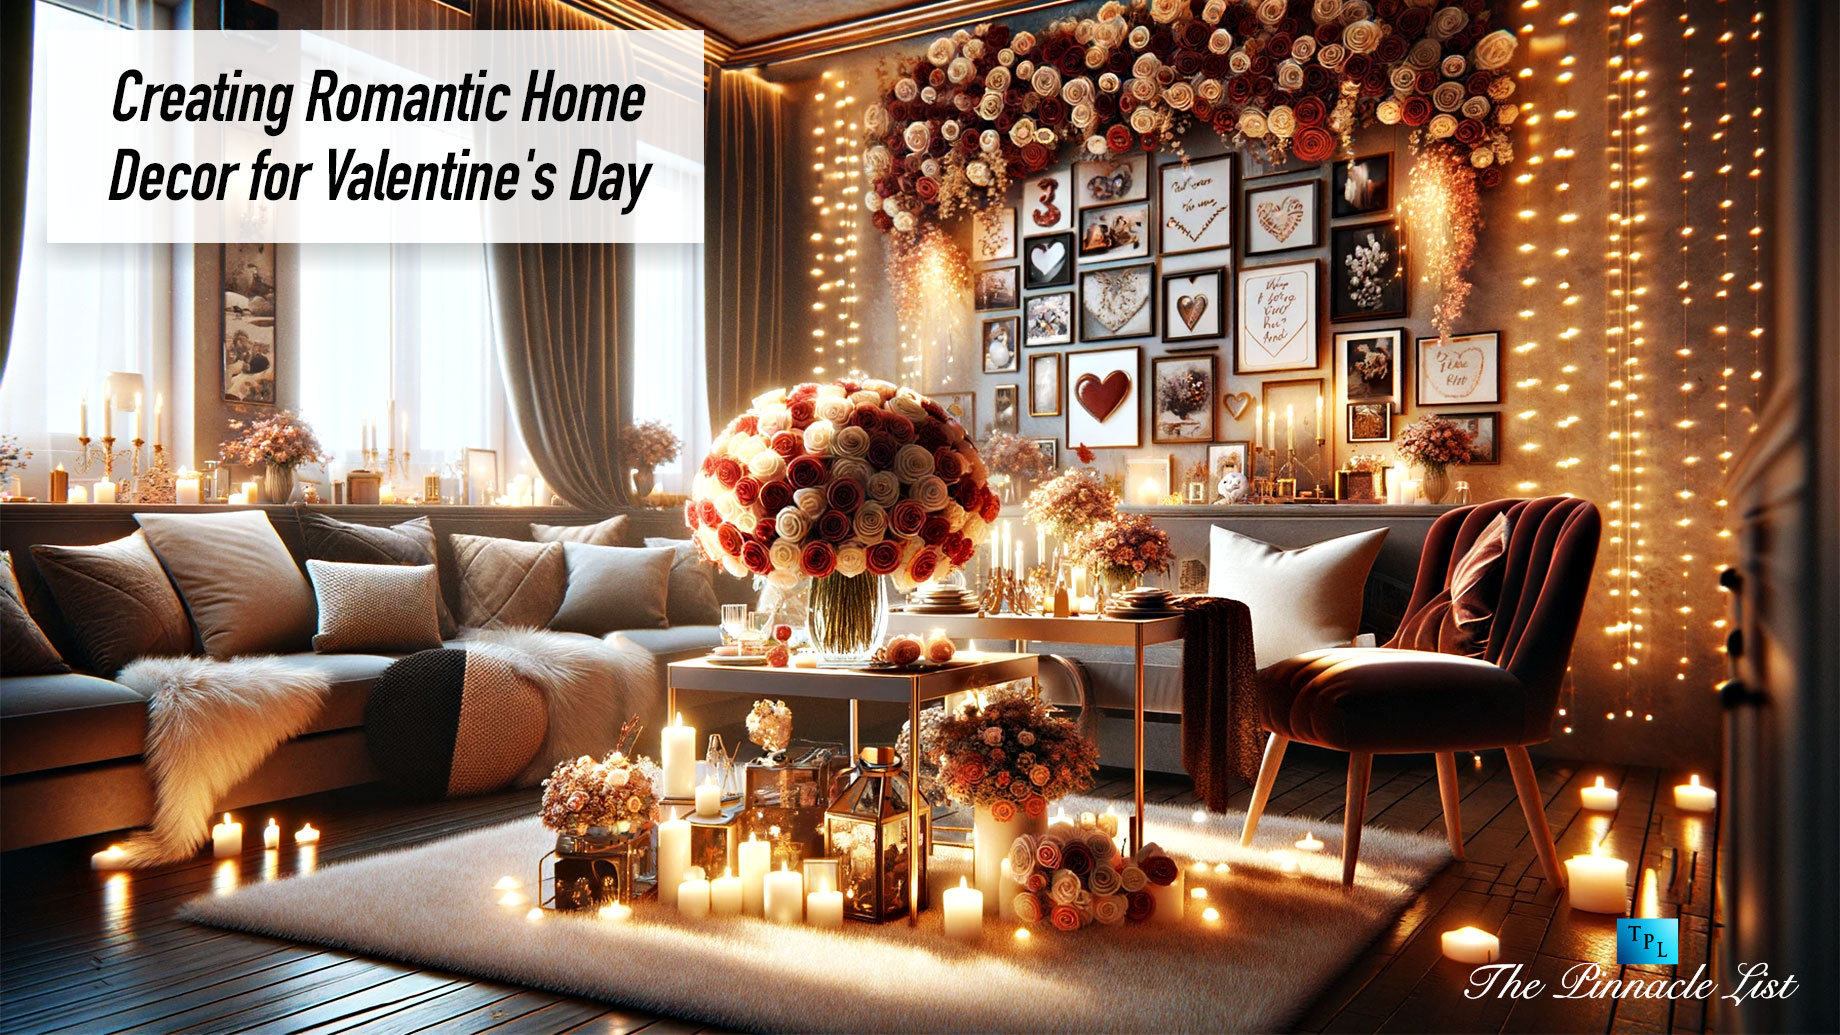 Creating a Romantic Home Decor for Valentine's Day